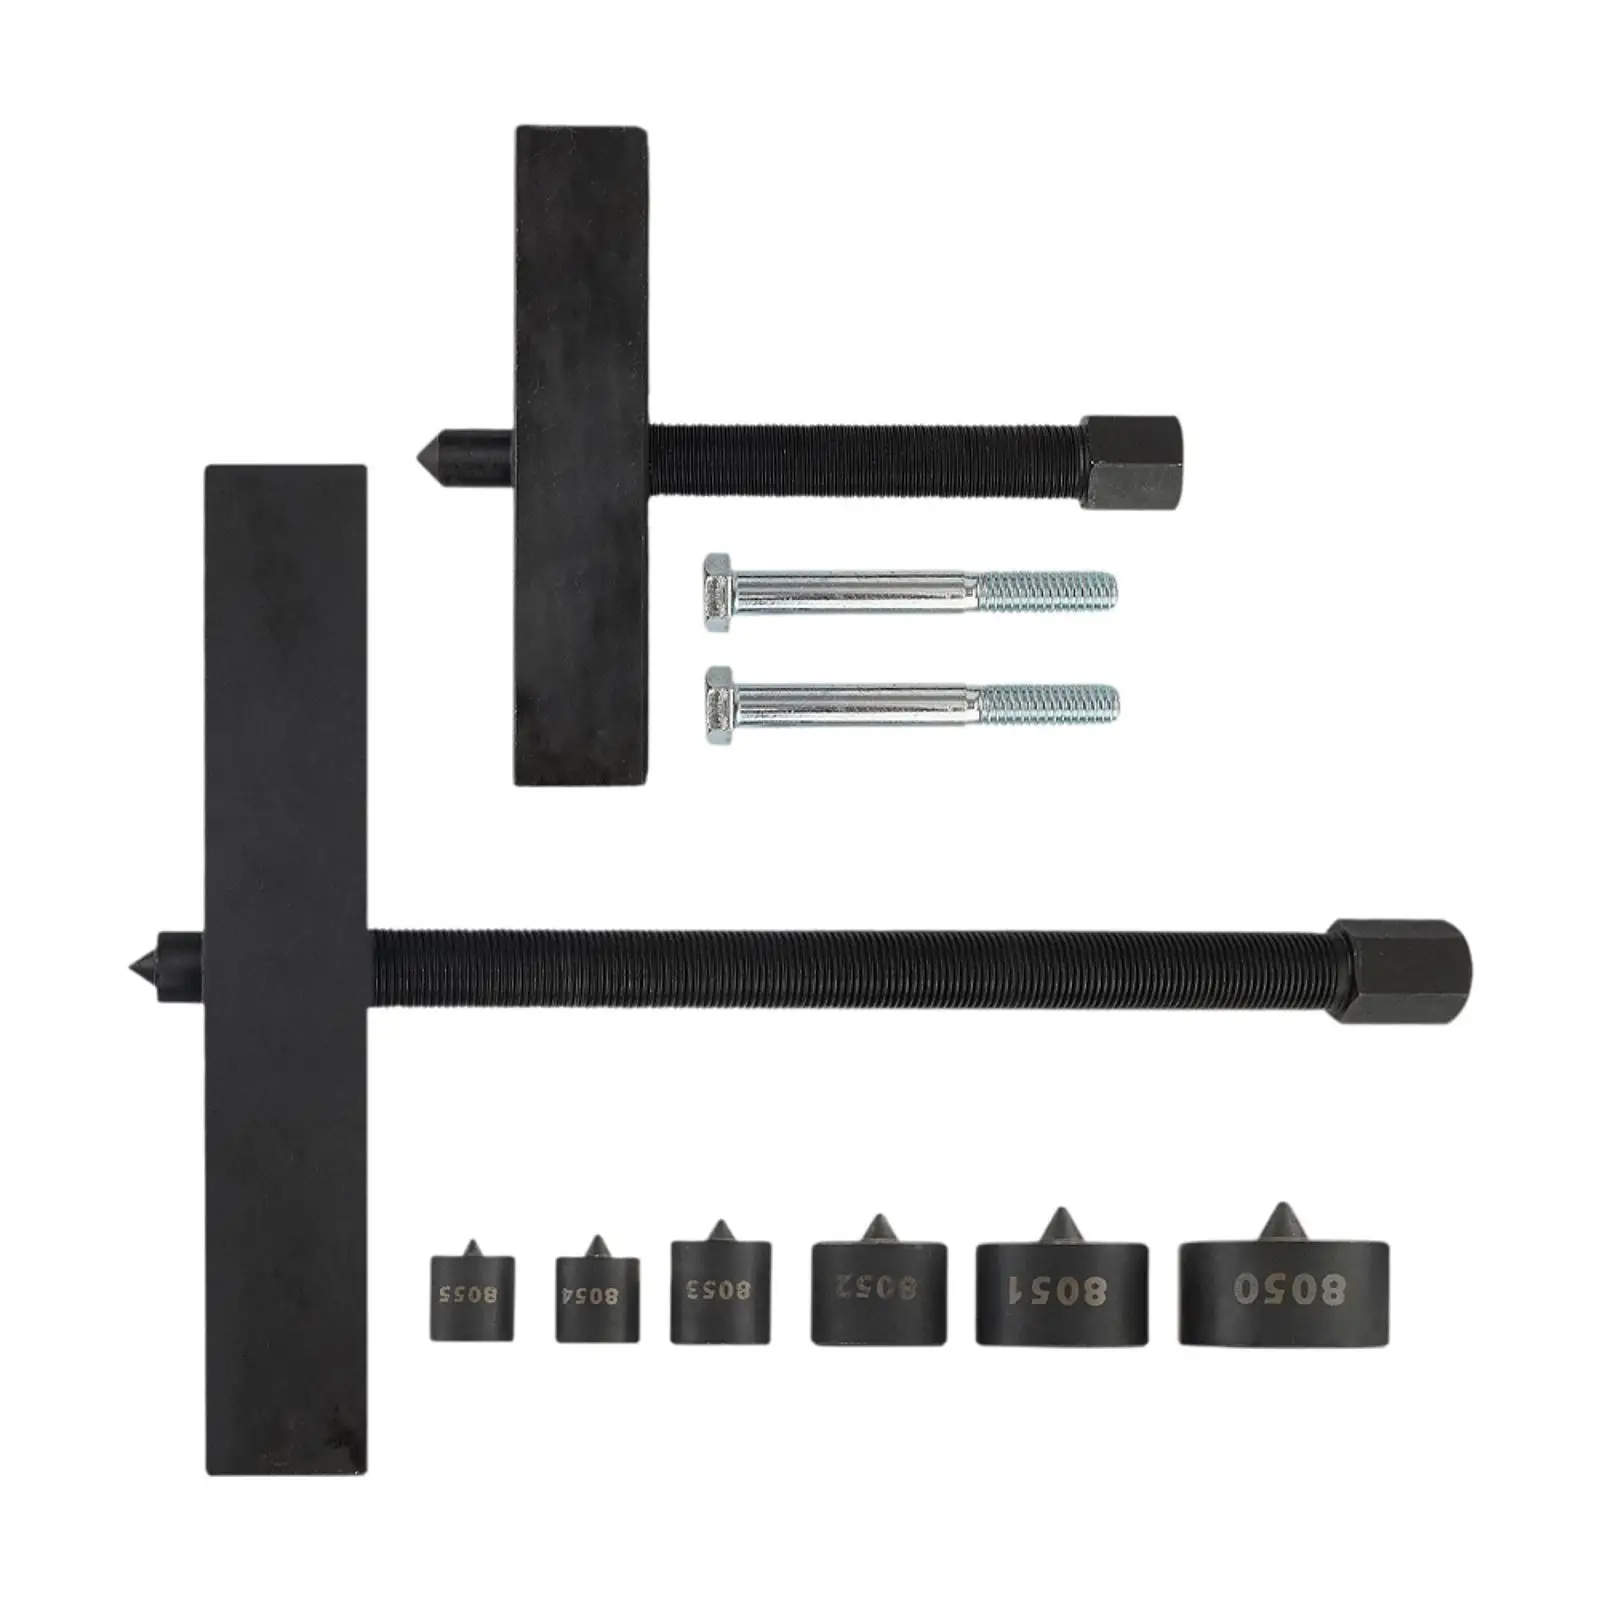 

Gear and Pulley Puller Set 8056 Shaft Protector with Long Forcing Screws 393 Gear and Pulley Puller for Car Timing Gears